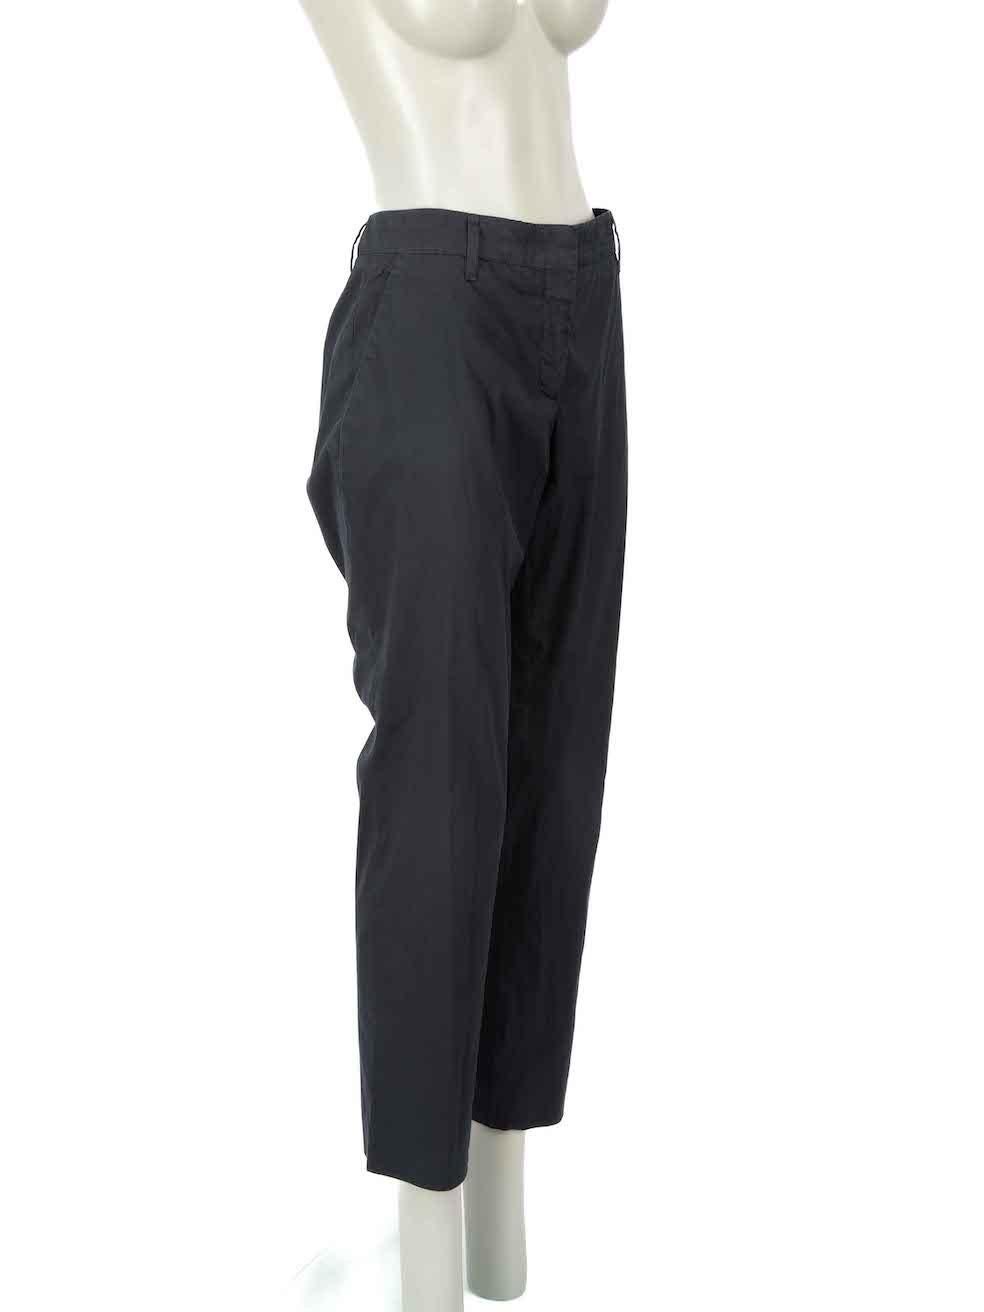 CONDITION is Very good. Minimal wear to trousers is evident. Minimal wear to the edges with light fading of the colour due to age on this used Prada designer resale item.
 
Details
Navy
Cotton
Trousers
Straight fit
2x Side pockets
2x Back